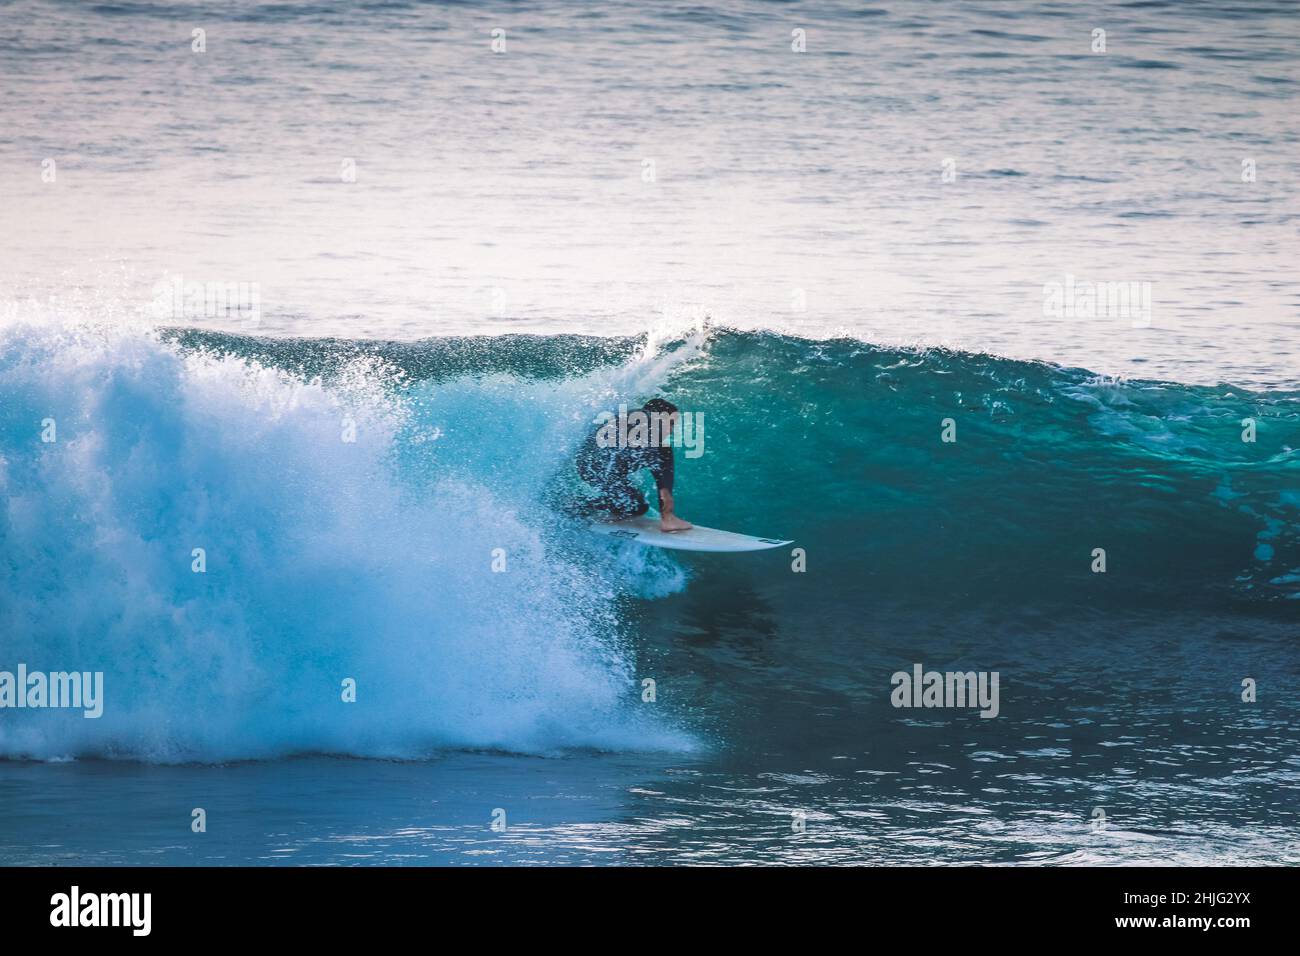 Surfer in a perfect barrel wave Stock Photo